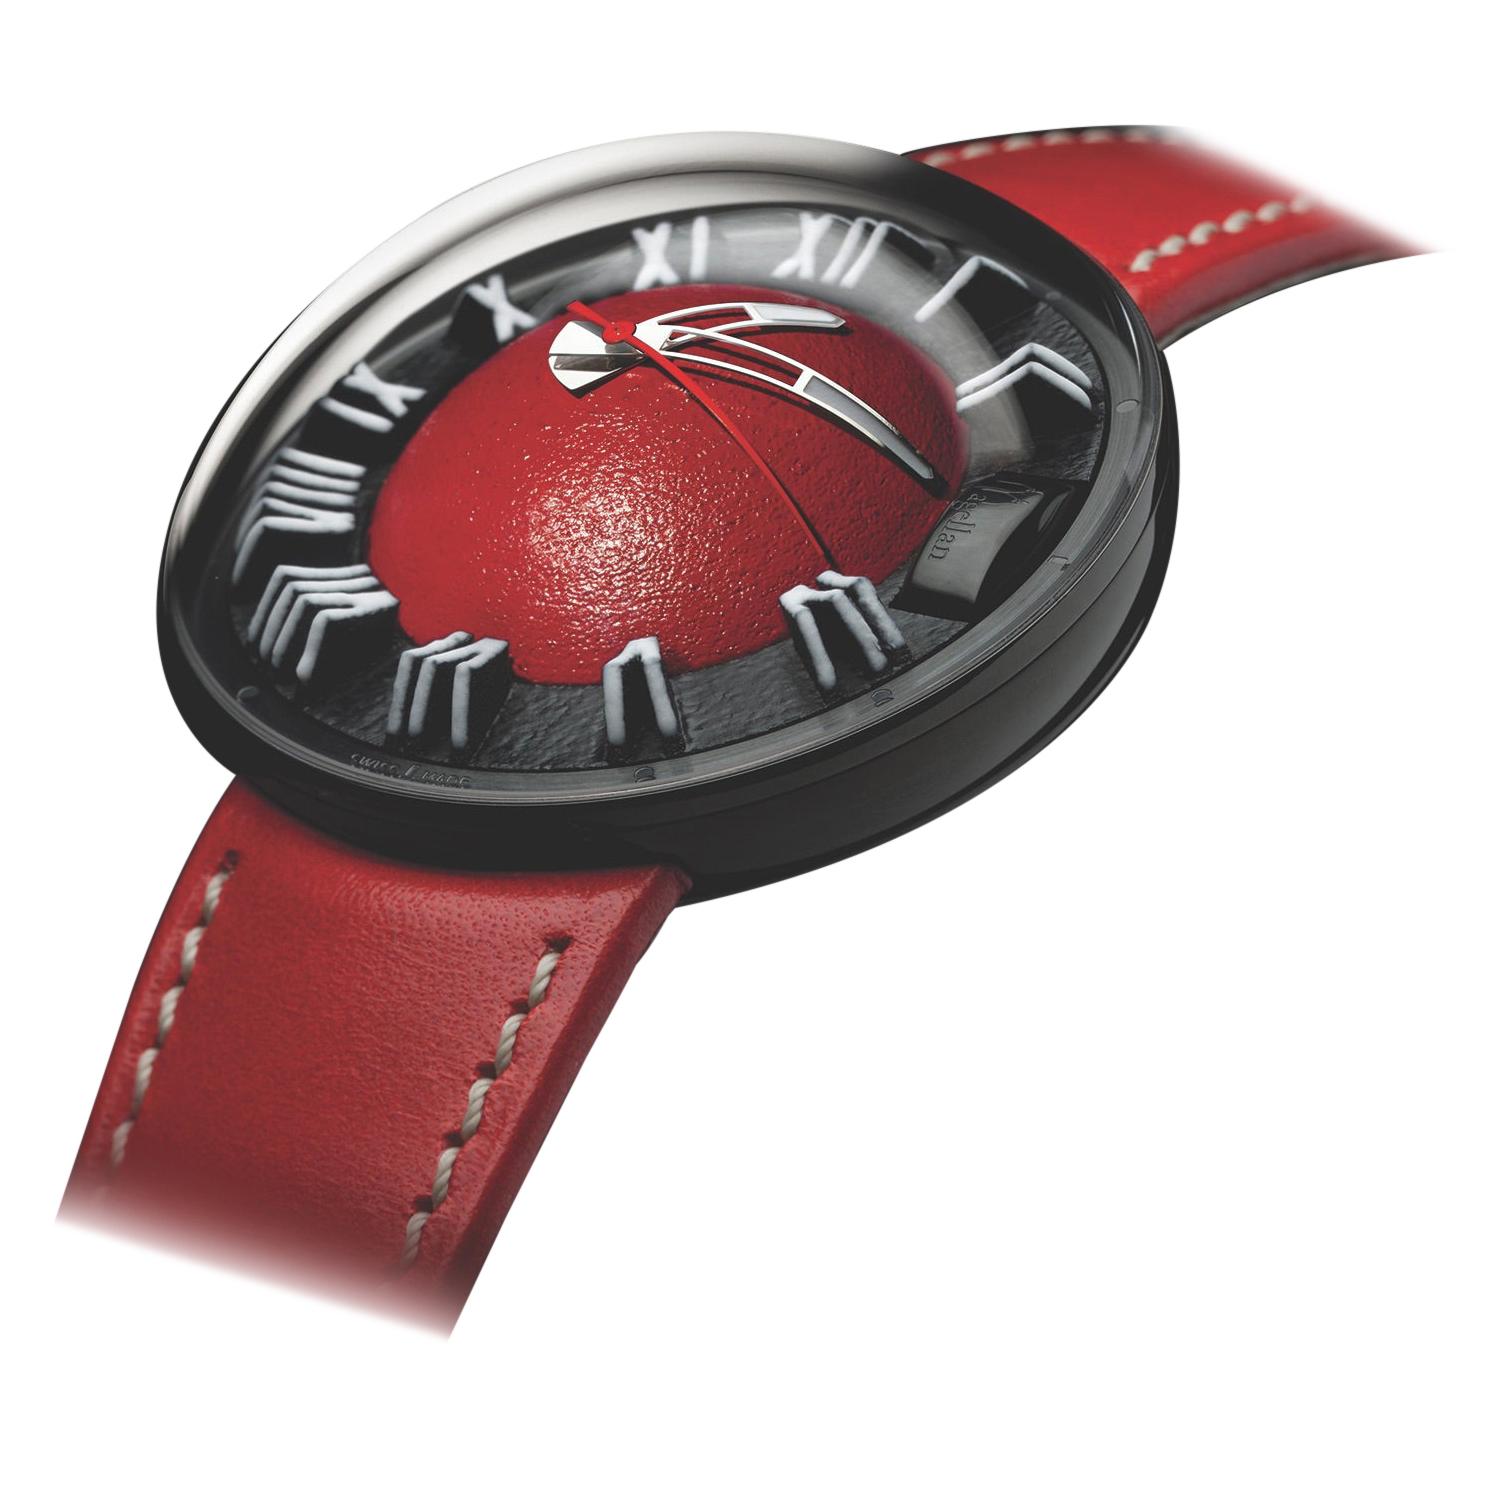 Magellan 11 Red Emotion Watch in Polished 316L Steel with Black PVD/CVD Coating For Sale